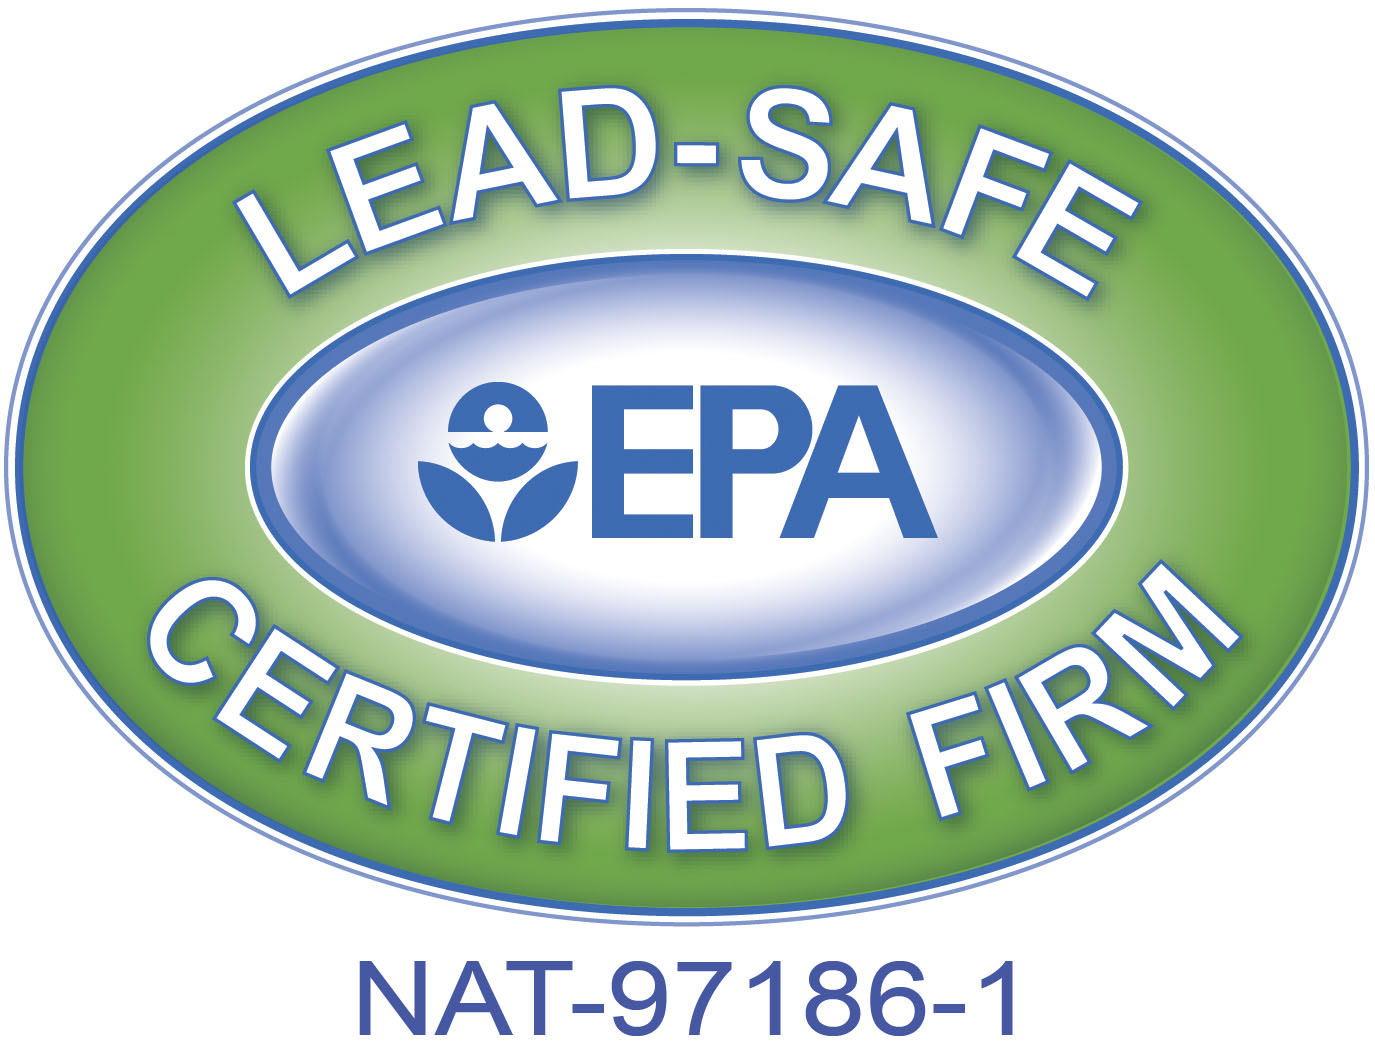 Find out about EPA Lead-Safe Certification